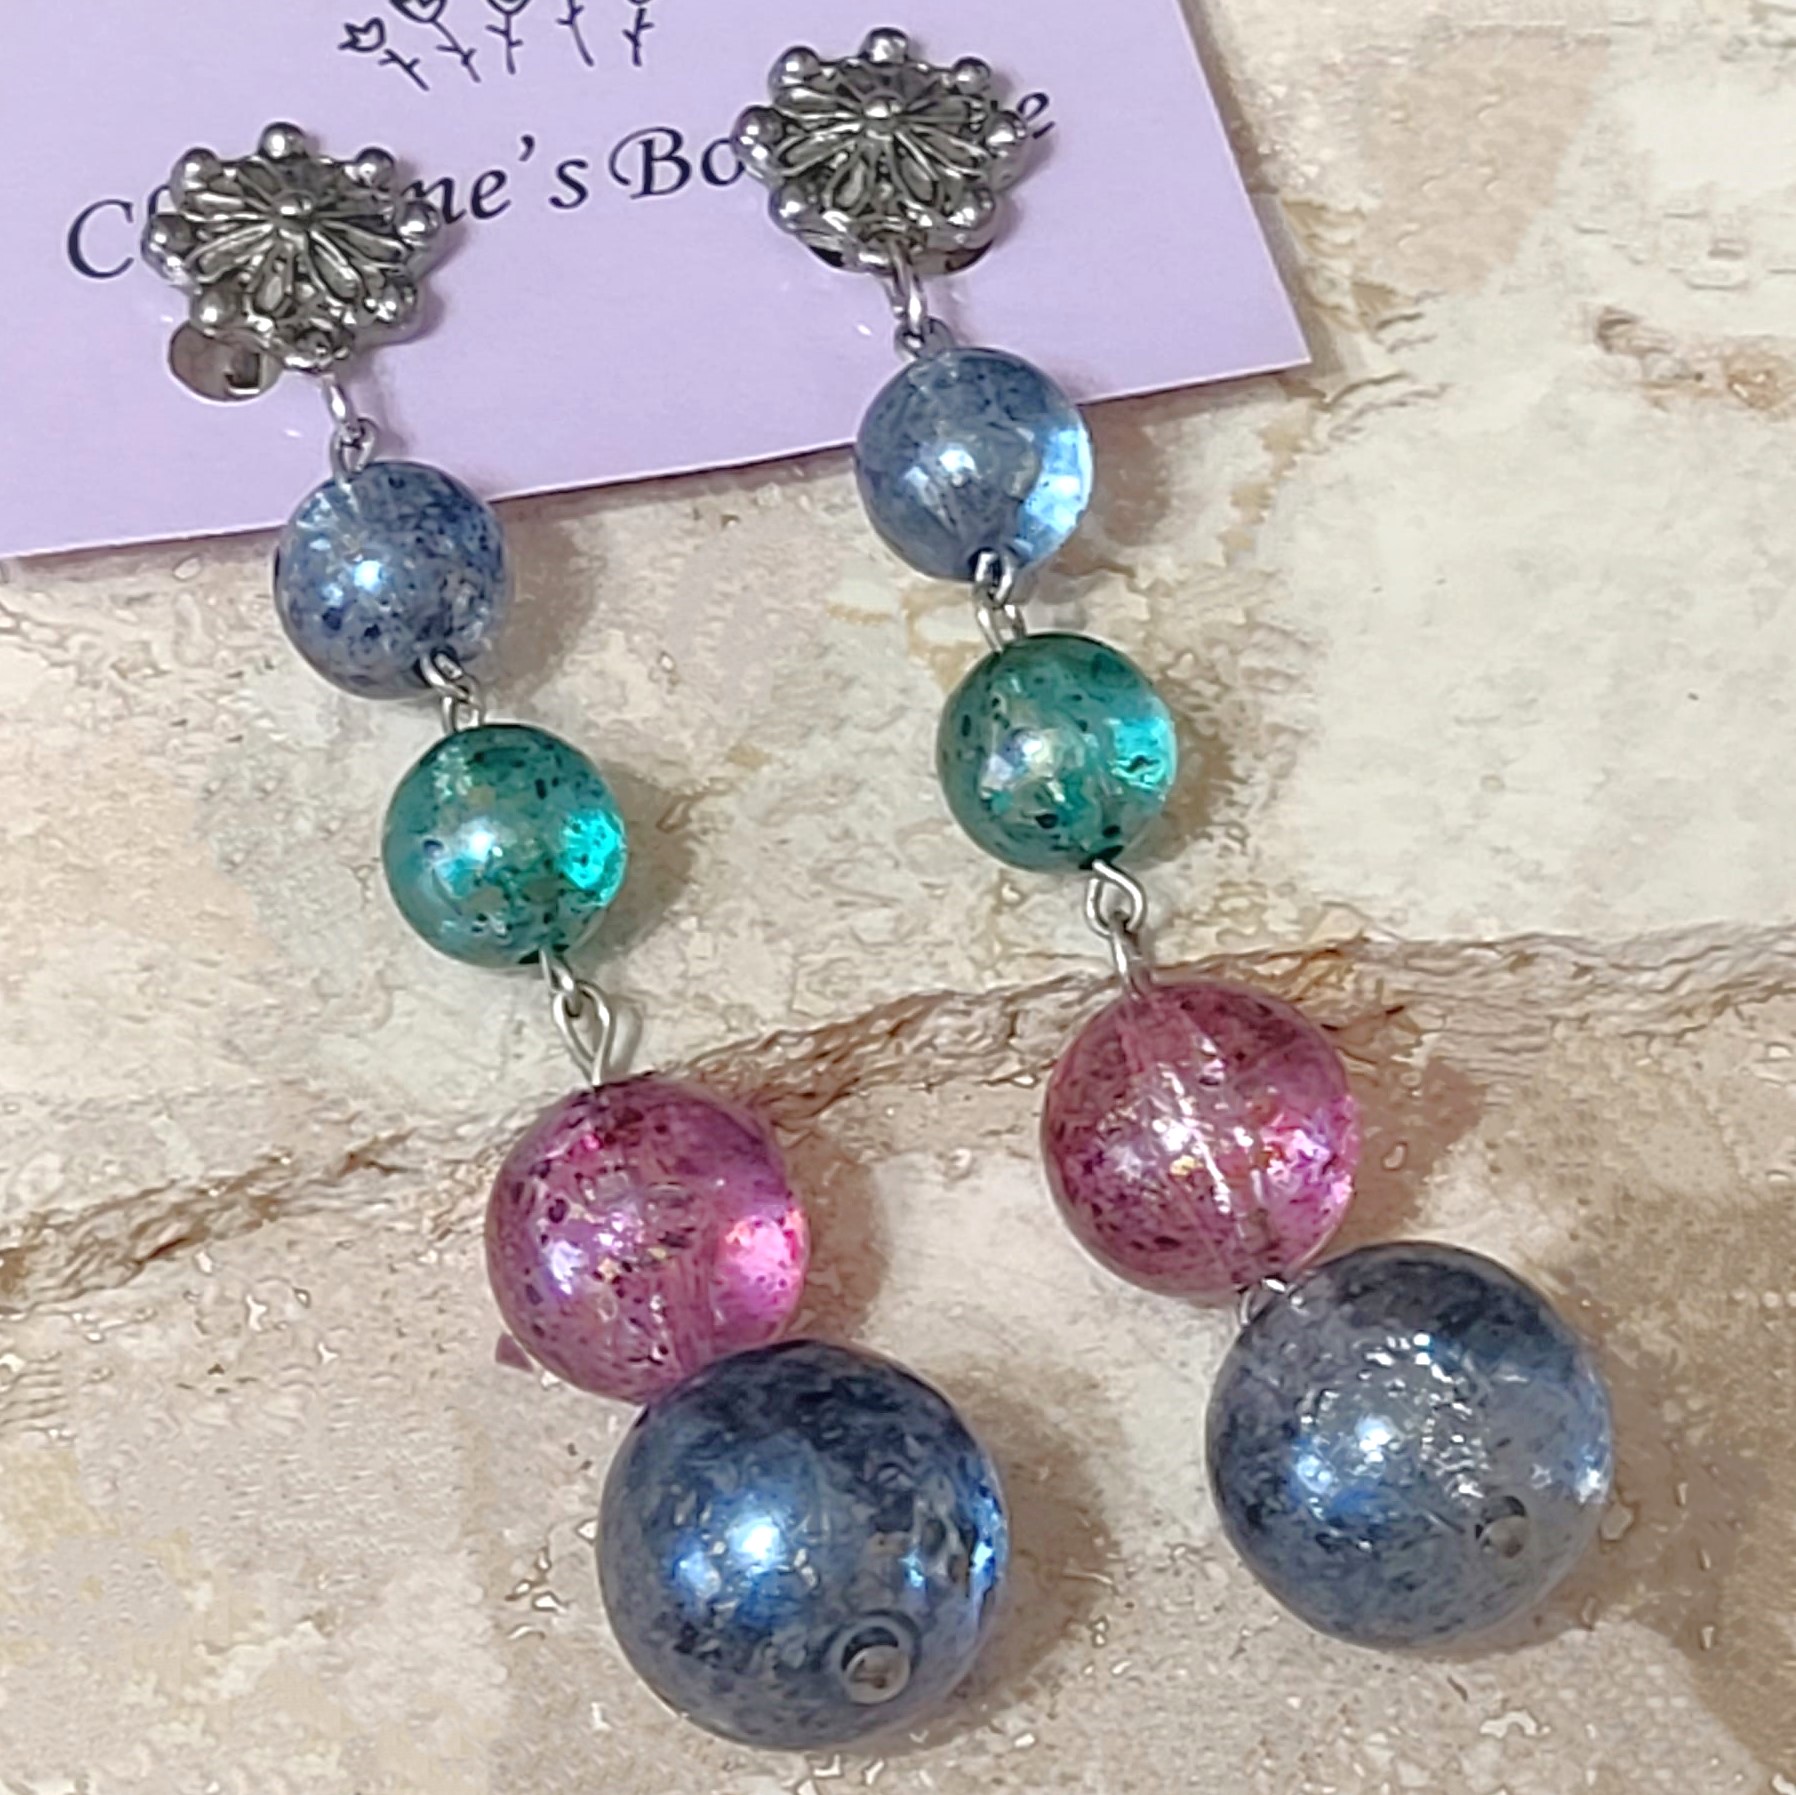 Bauble bead vintage earrings, 4 row beads, clip ons - Click Image to Close